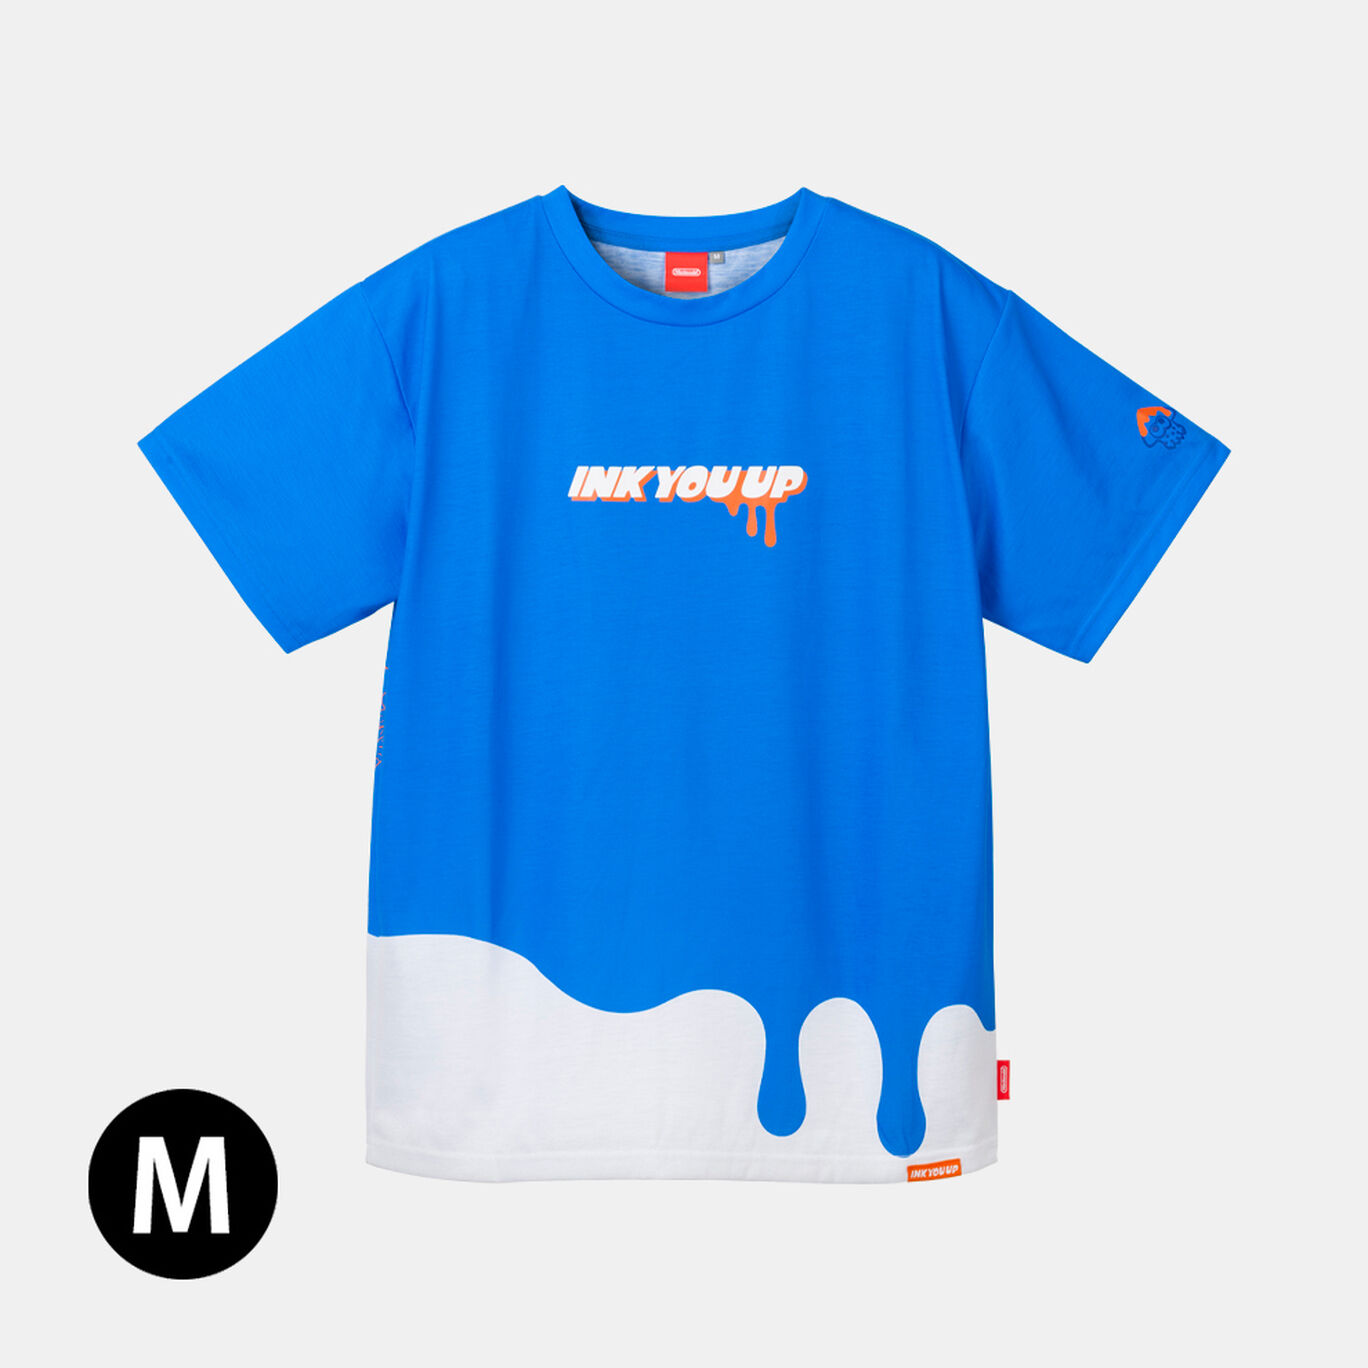 Tシャツ A M INK YOU UP【Nintendo TOKYO取り扱い商品】